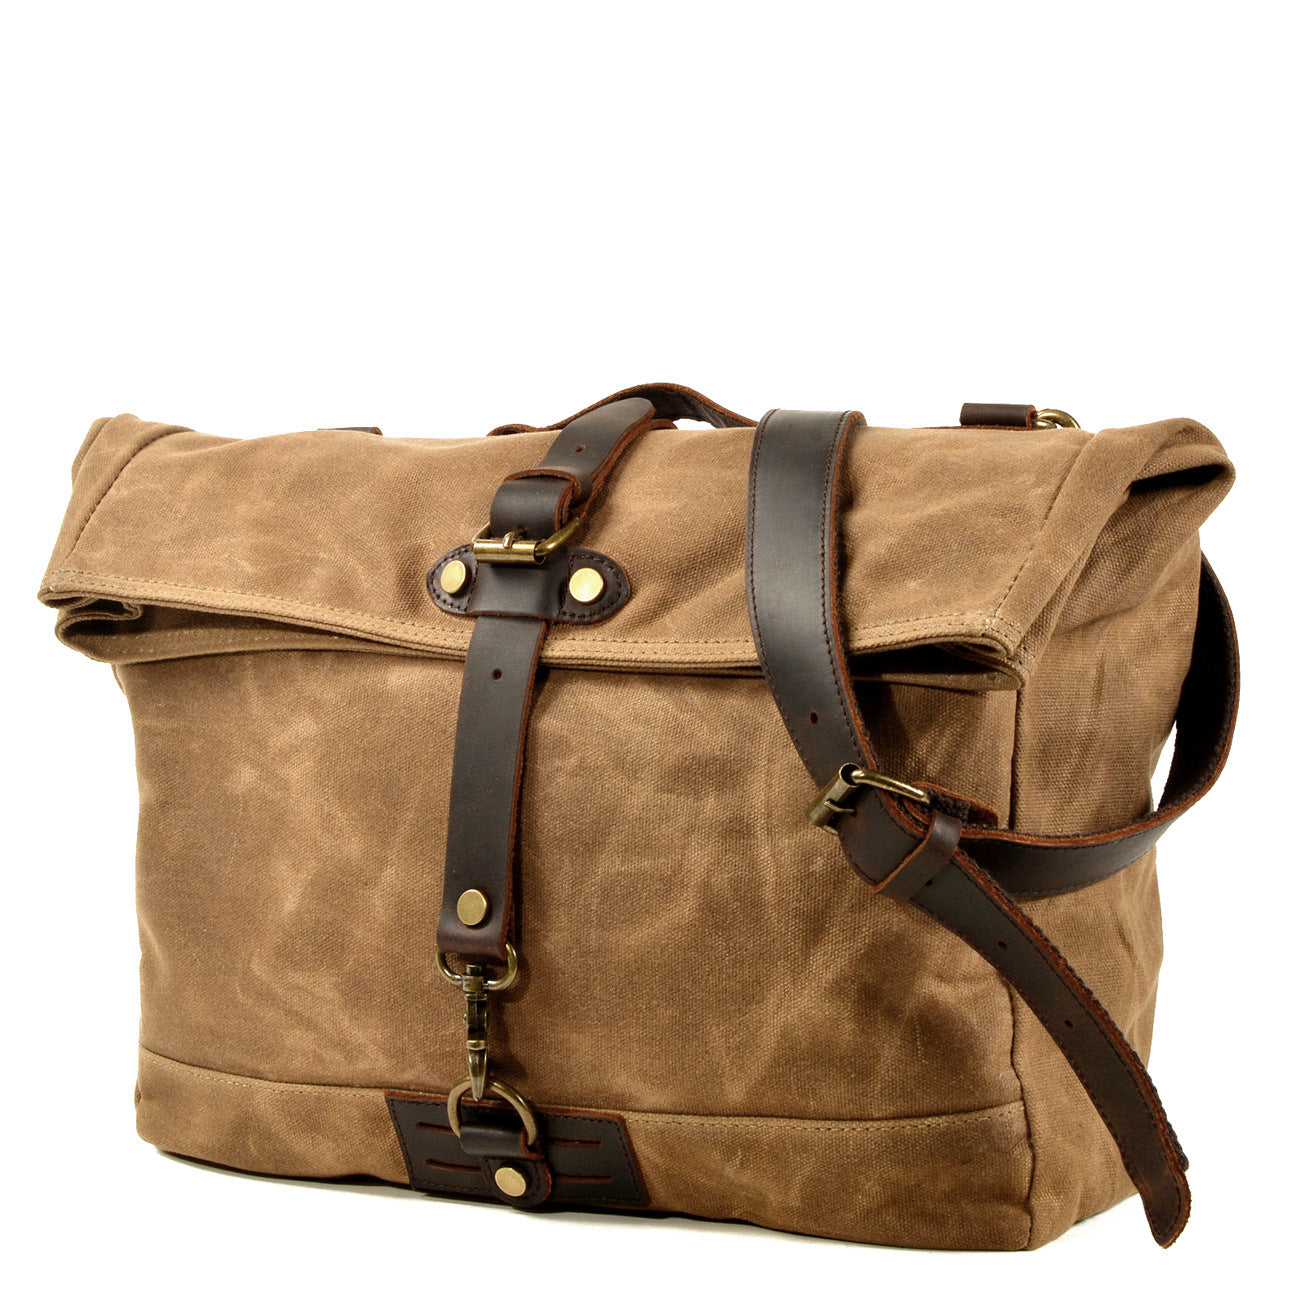 Waxed Canvas Roll Top Tote Bag / Office Bag With Luggage Handle Attachment  Leather Handles and Shoulder Strap 